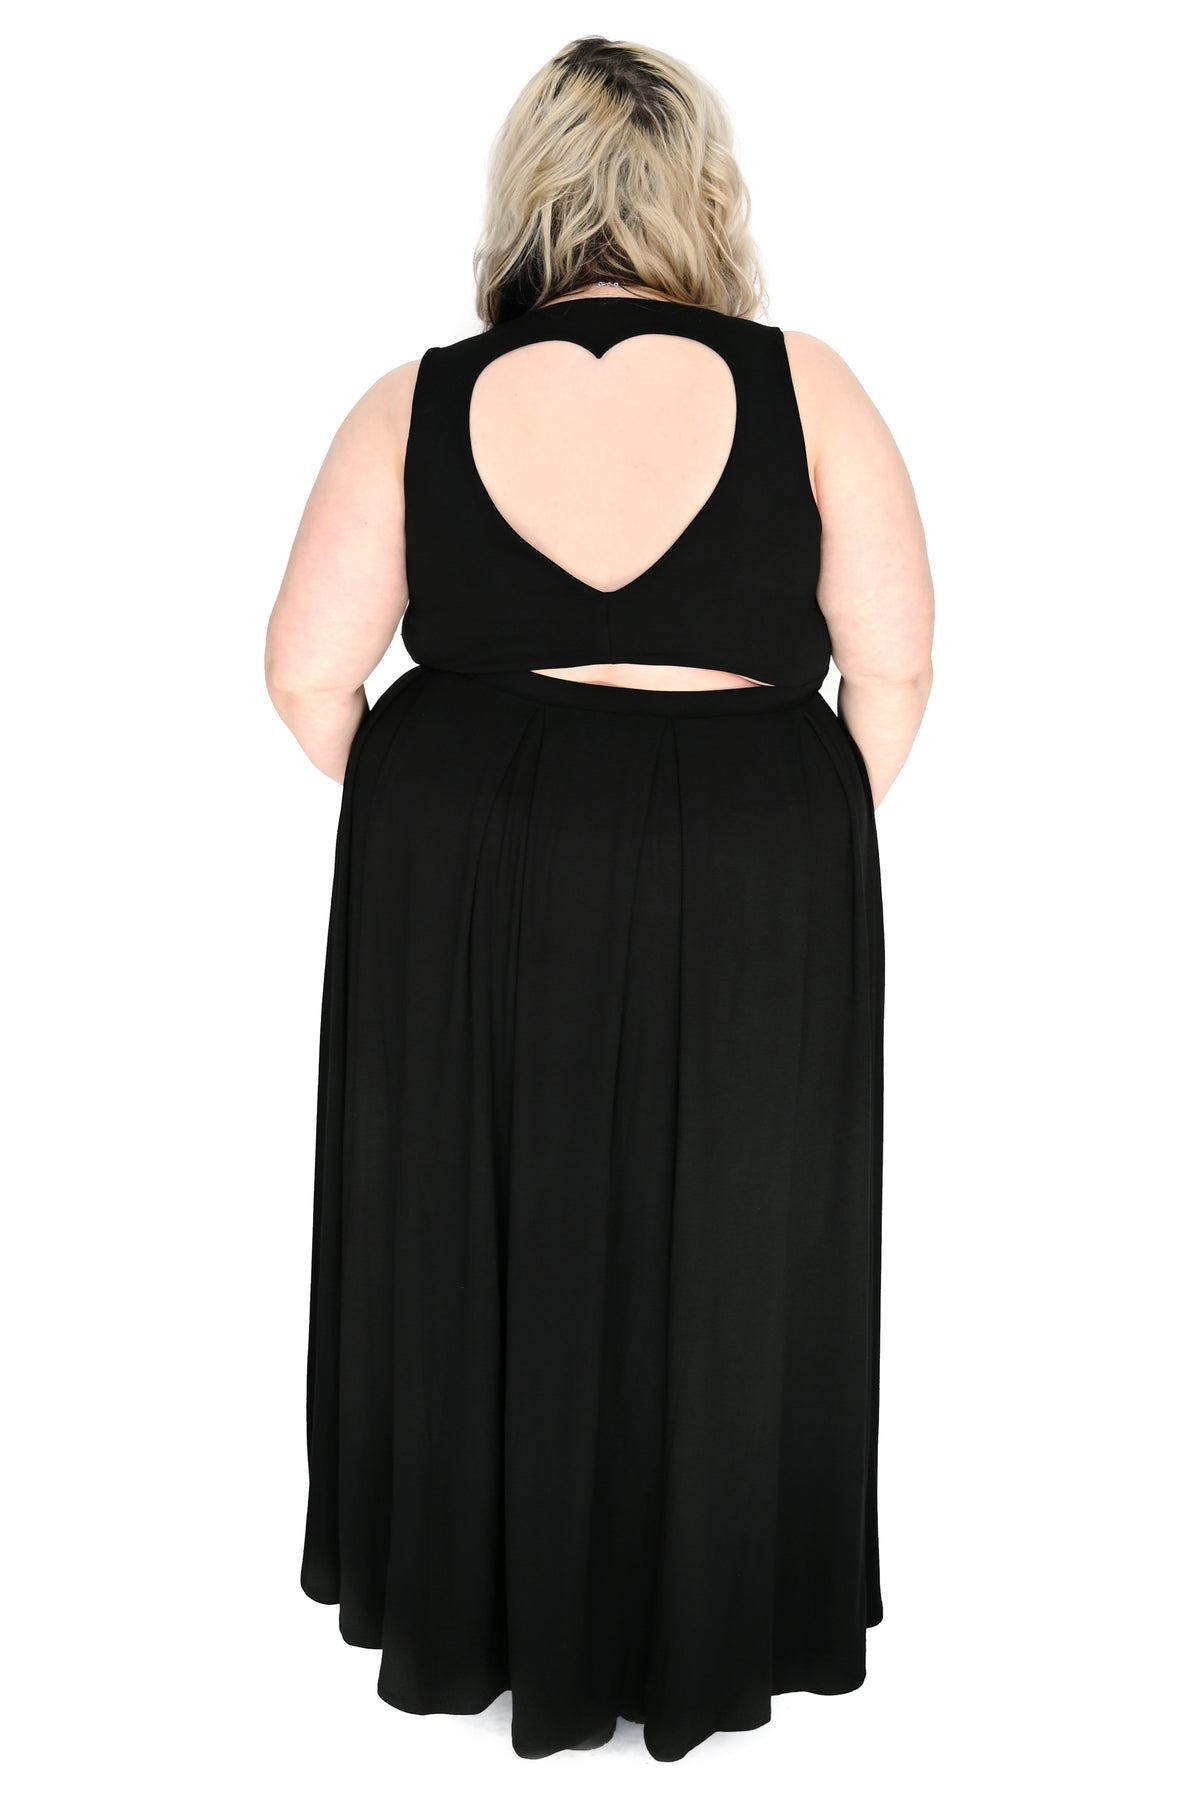 black maxi dress with square neckline and heart cut out on back